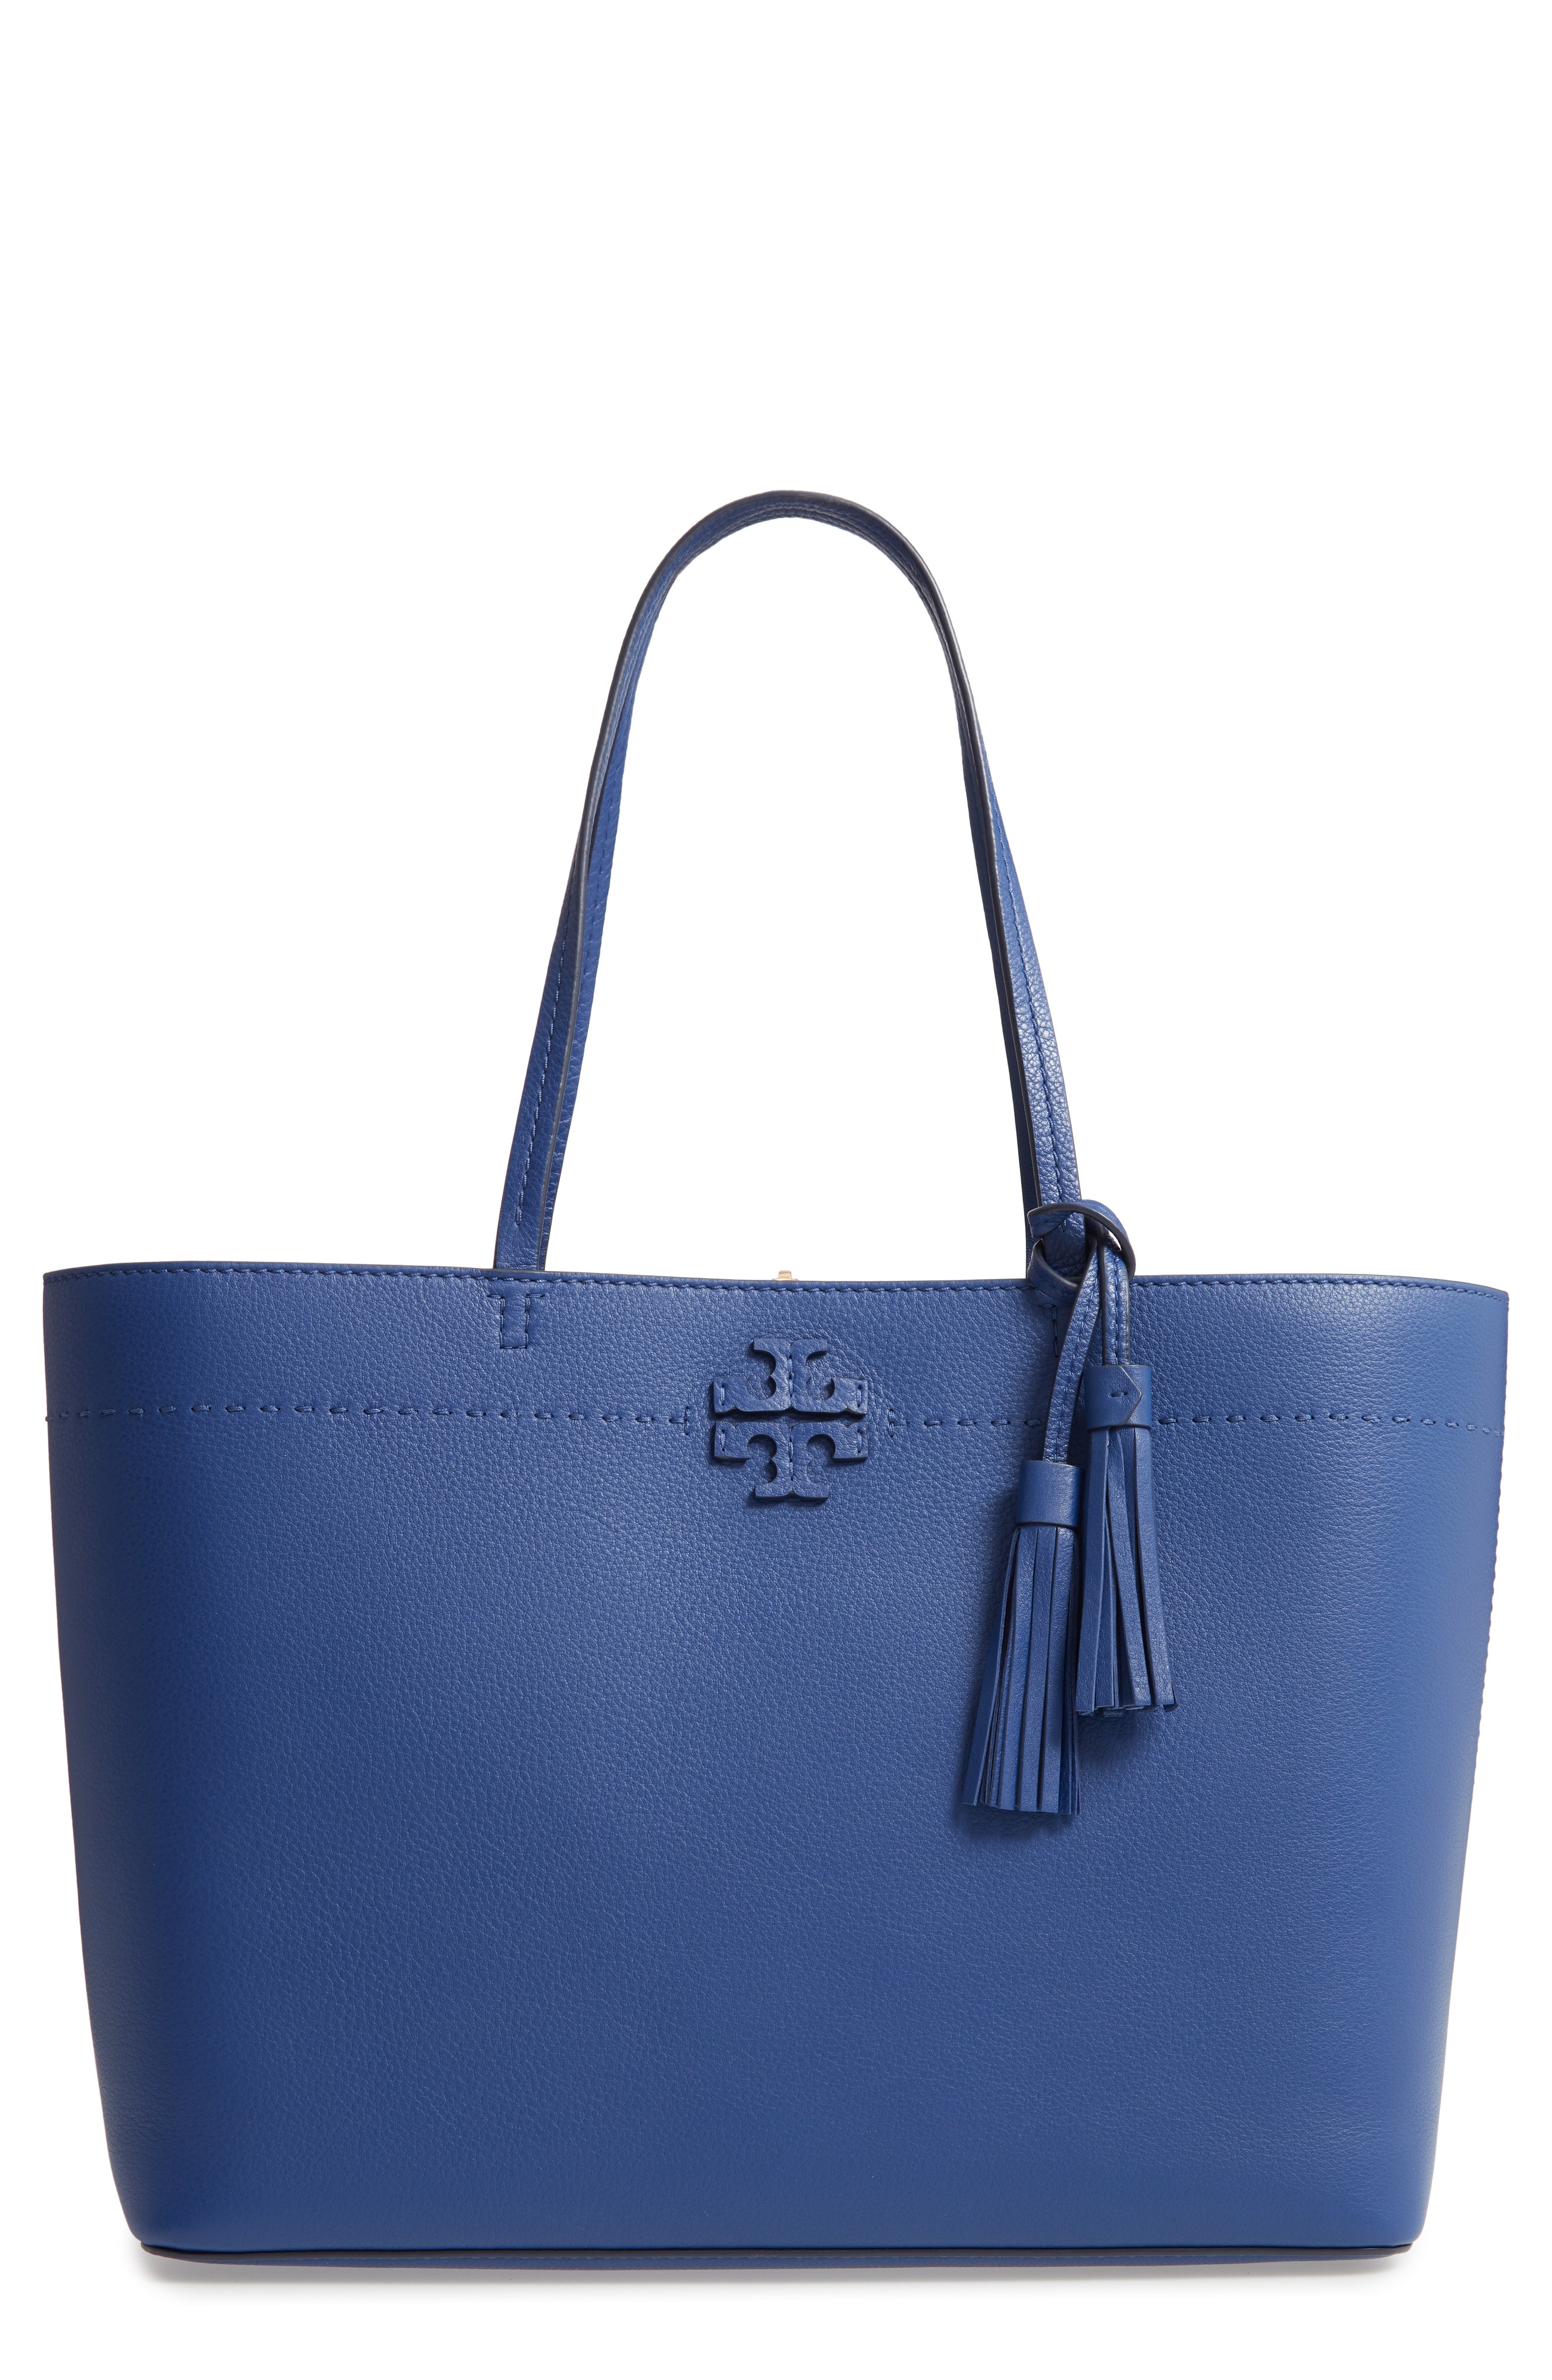 Tory Burch McGraw Leather Laptop Tote